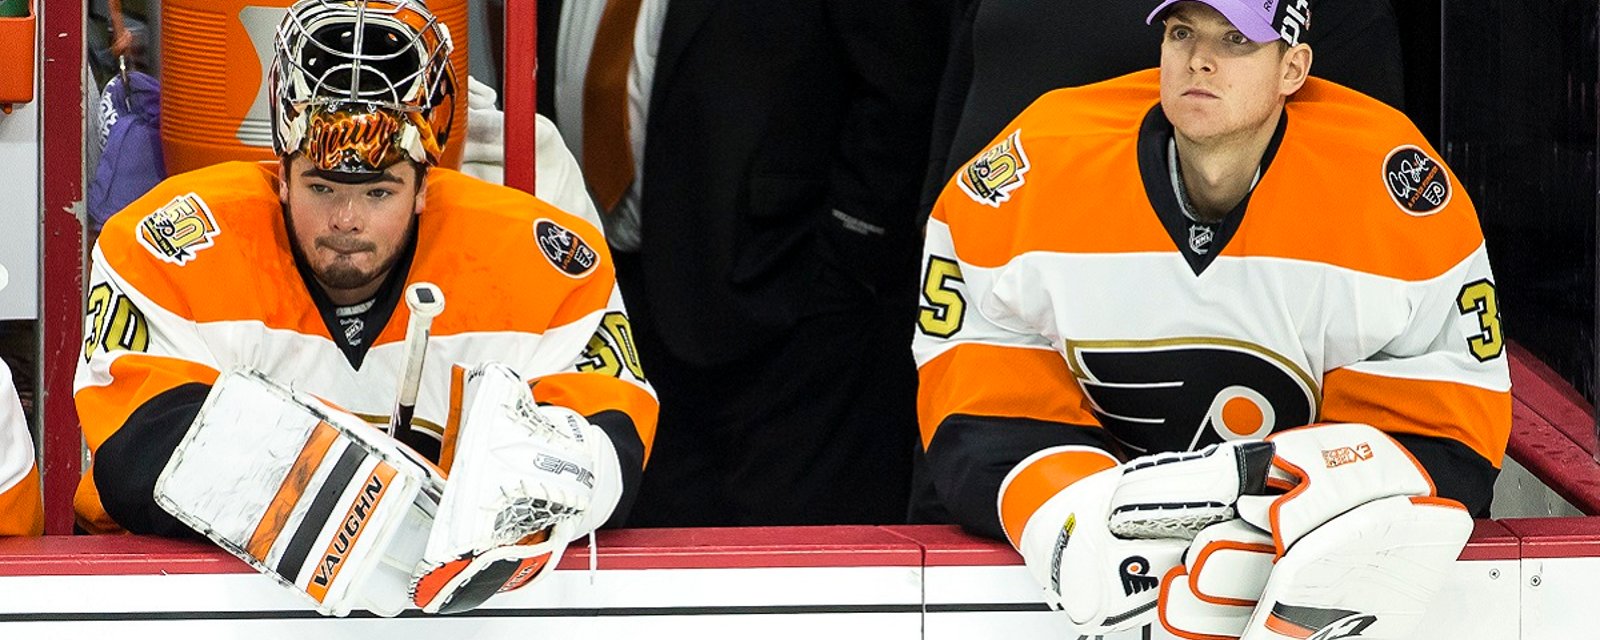 Breaking: Flyers expected to make major change in goal.